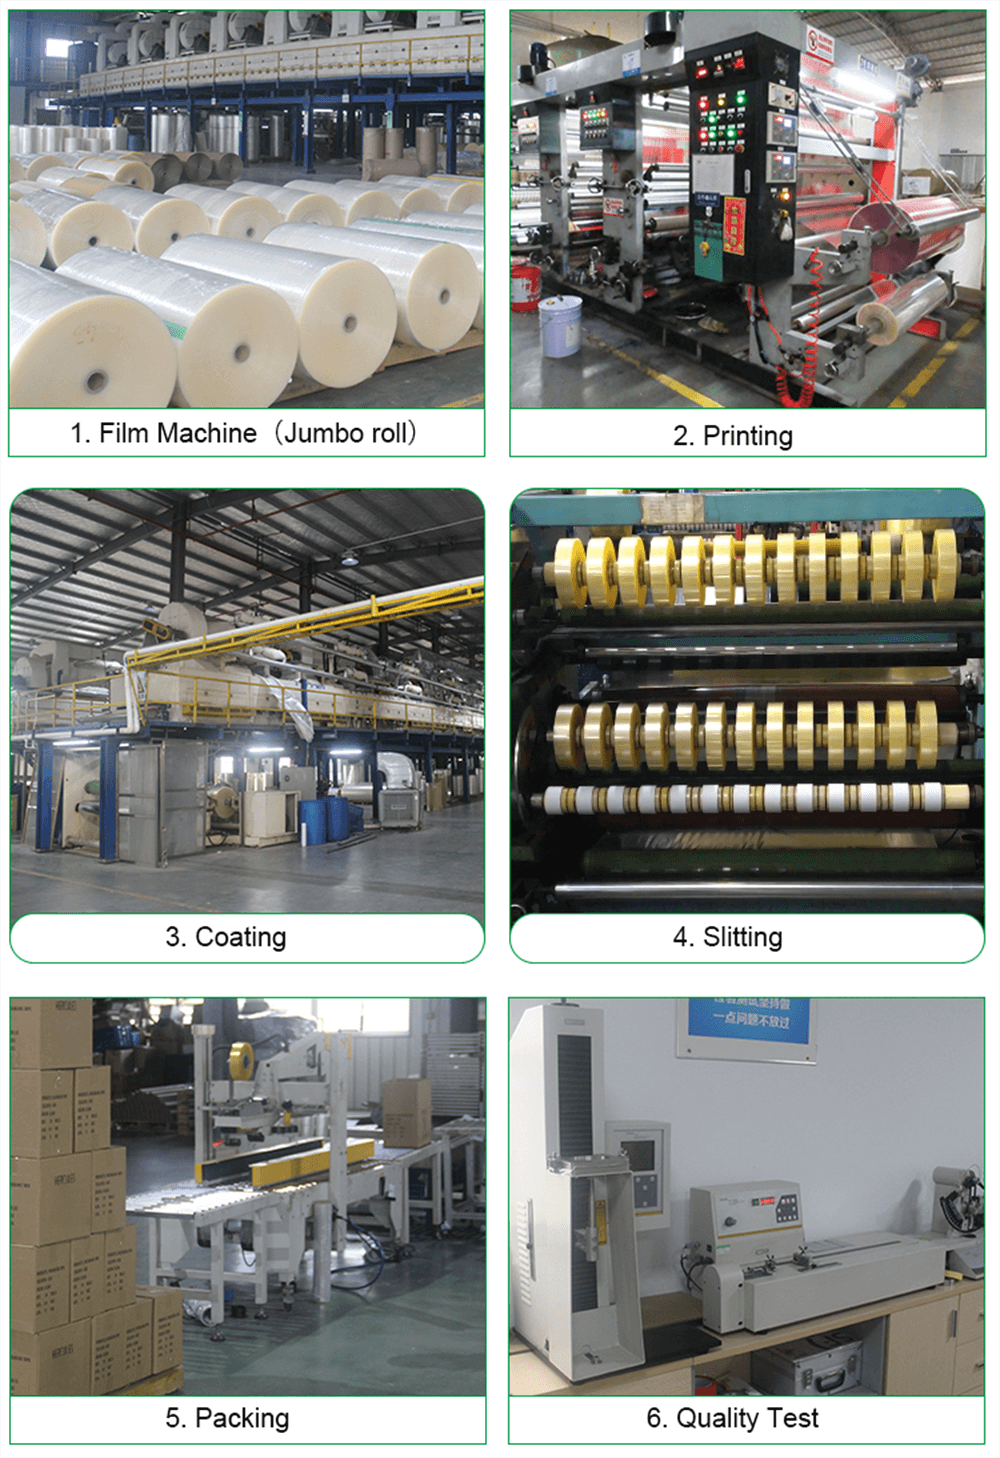 Packing Tape Production Process